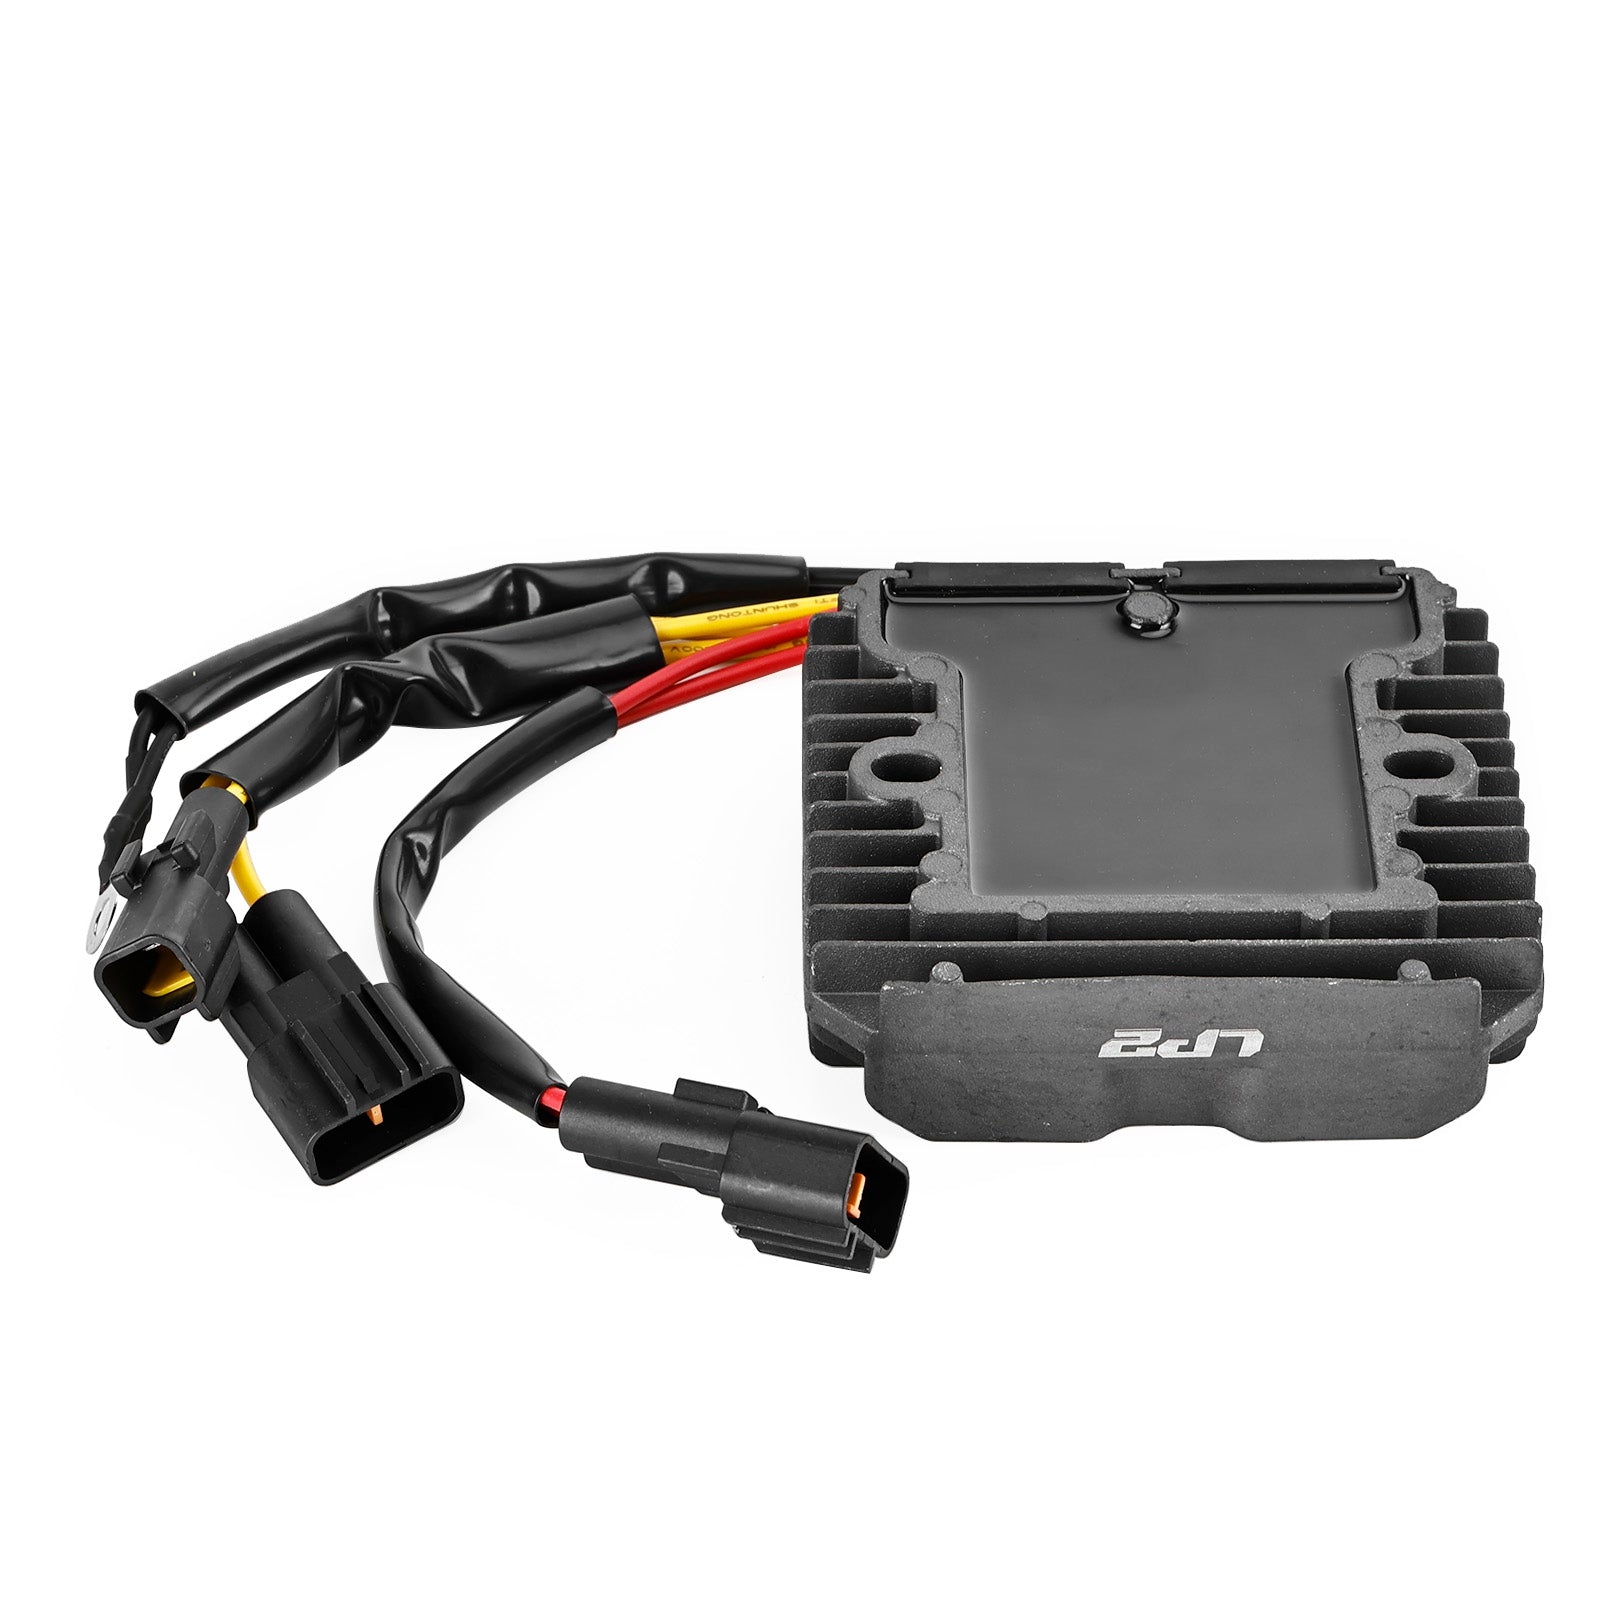 Redresseur pour moteur hors-bord Tohatsu MD75 75Hp MD90 90Hp MD115 115Hp 2010-2018